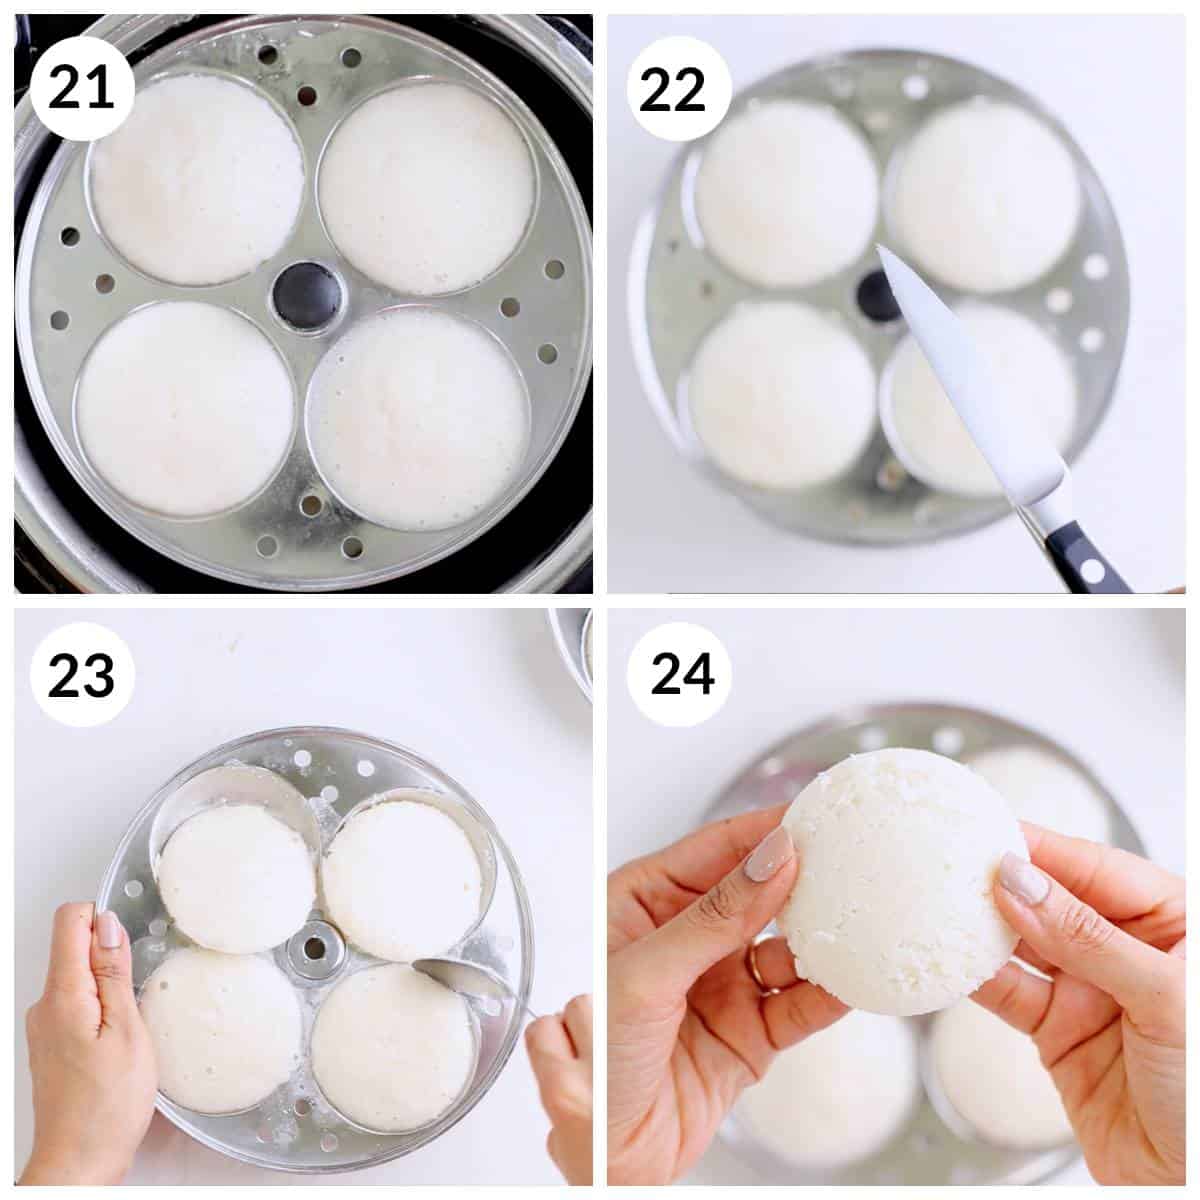 Steps for removing idli from idly mold